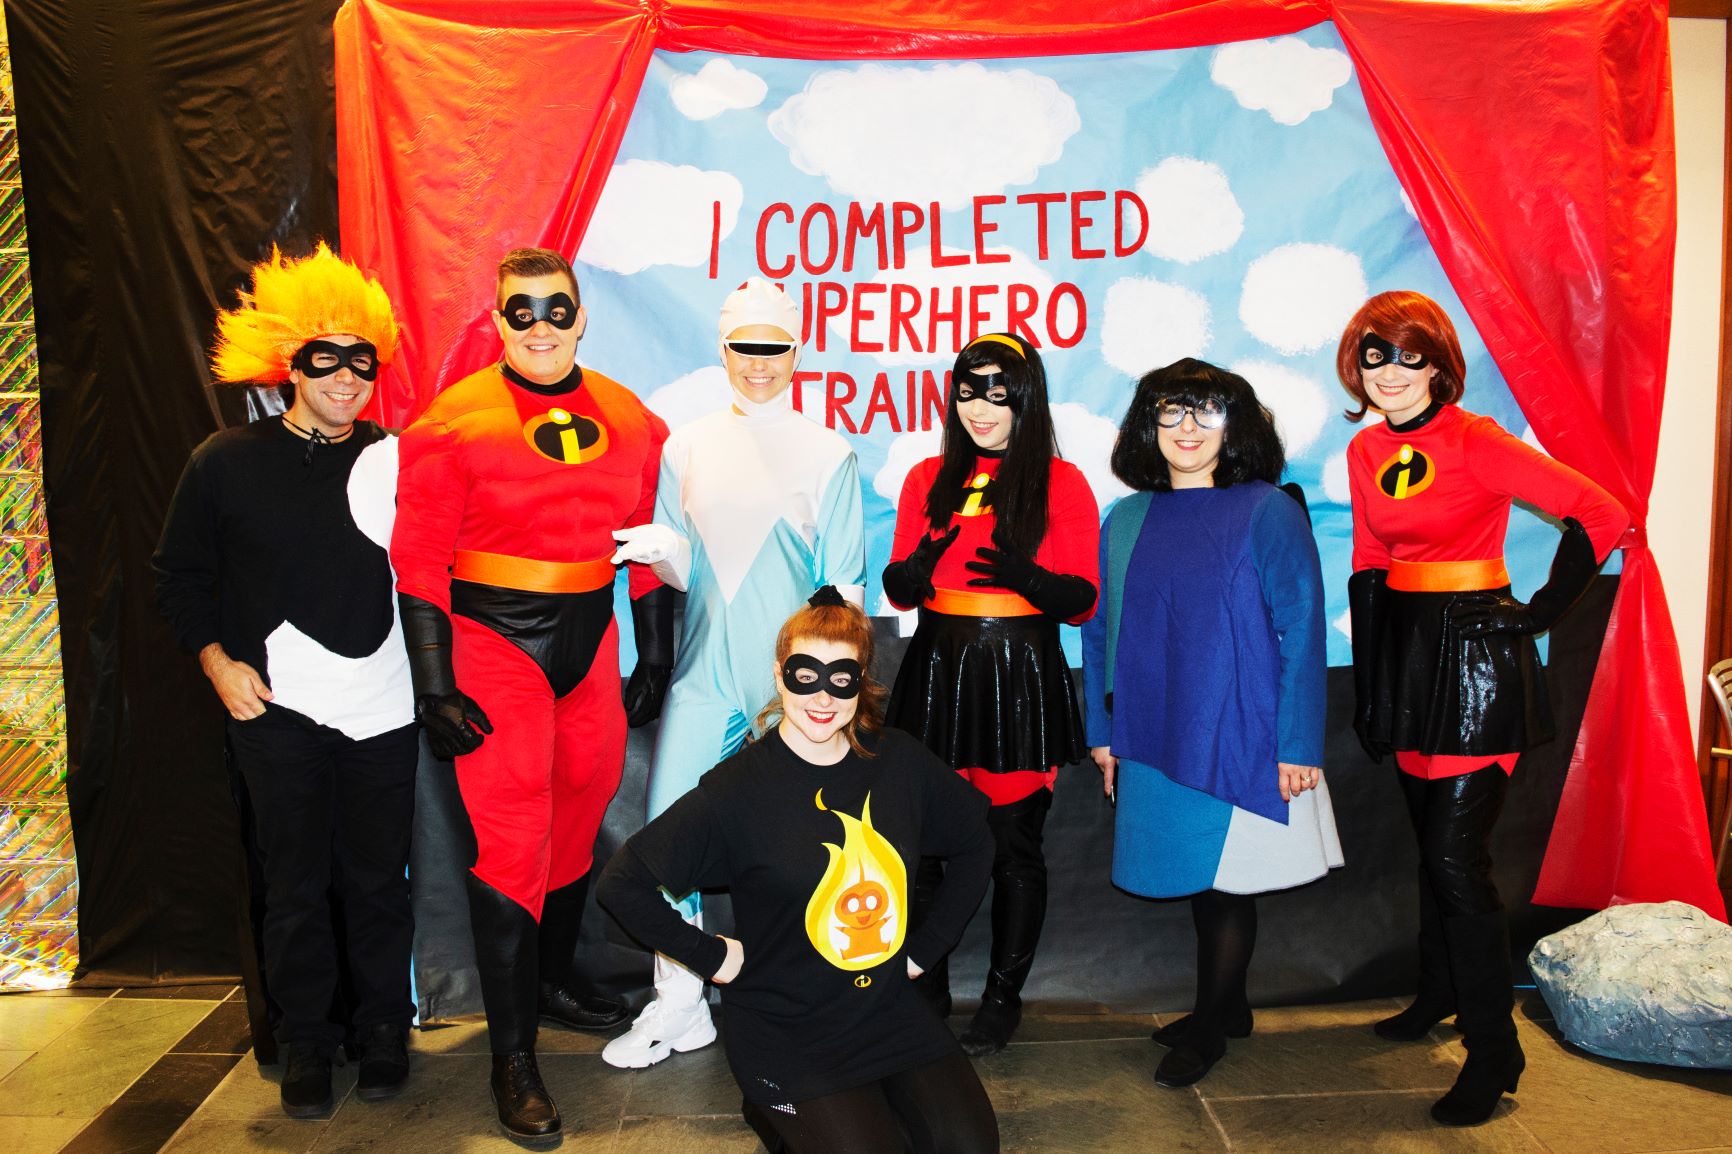 Baylor Law faculty, staff and students dressed as characters from Disney's "The Incredibles" pose in front of banner that reads, "I Completed Superhero Training."